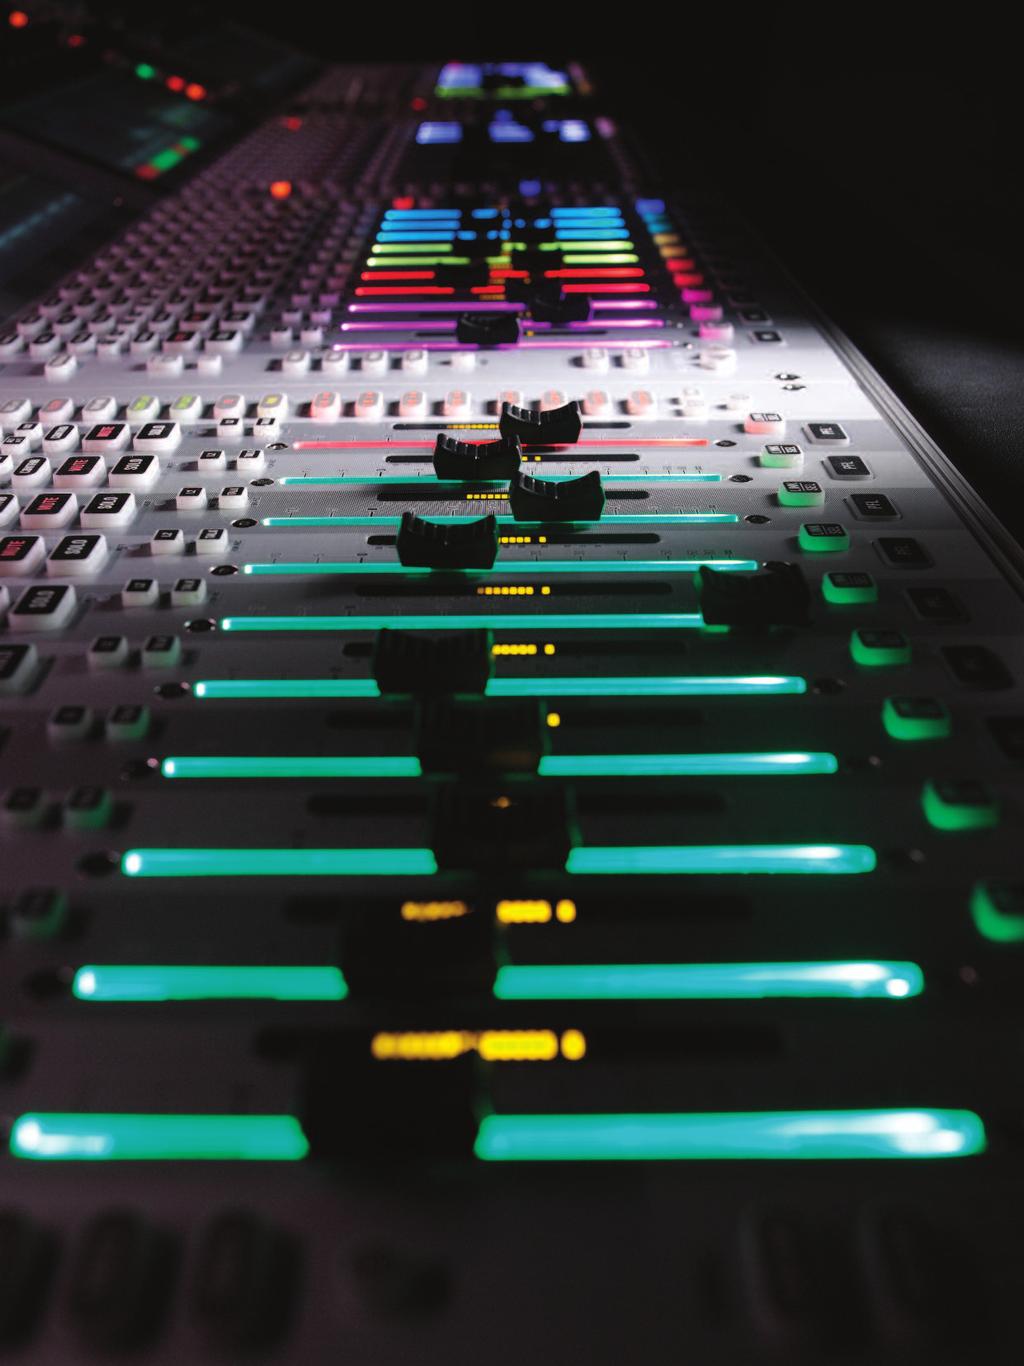 FaderGlow Lighting the way to intuitive mixing During a hectic live production, FaderGlow provides the operator with an instant overview of the console status by illuminating each fader in one of